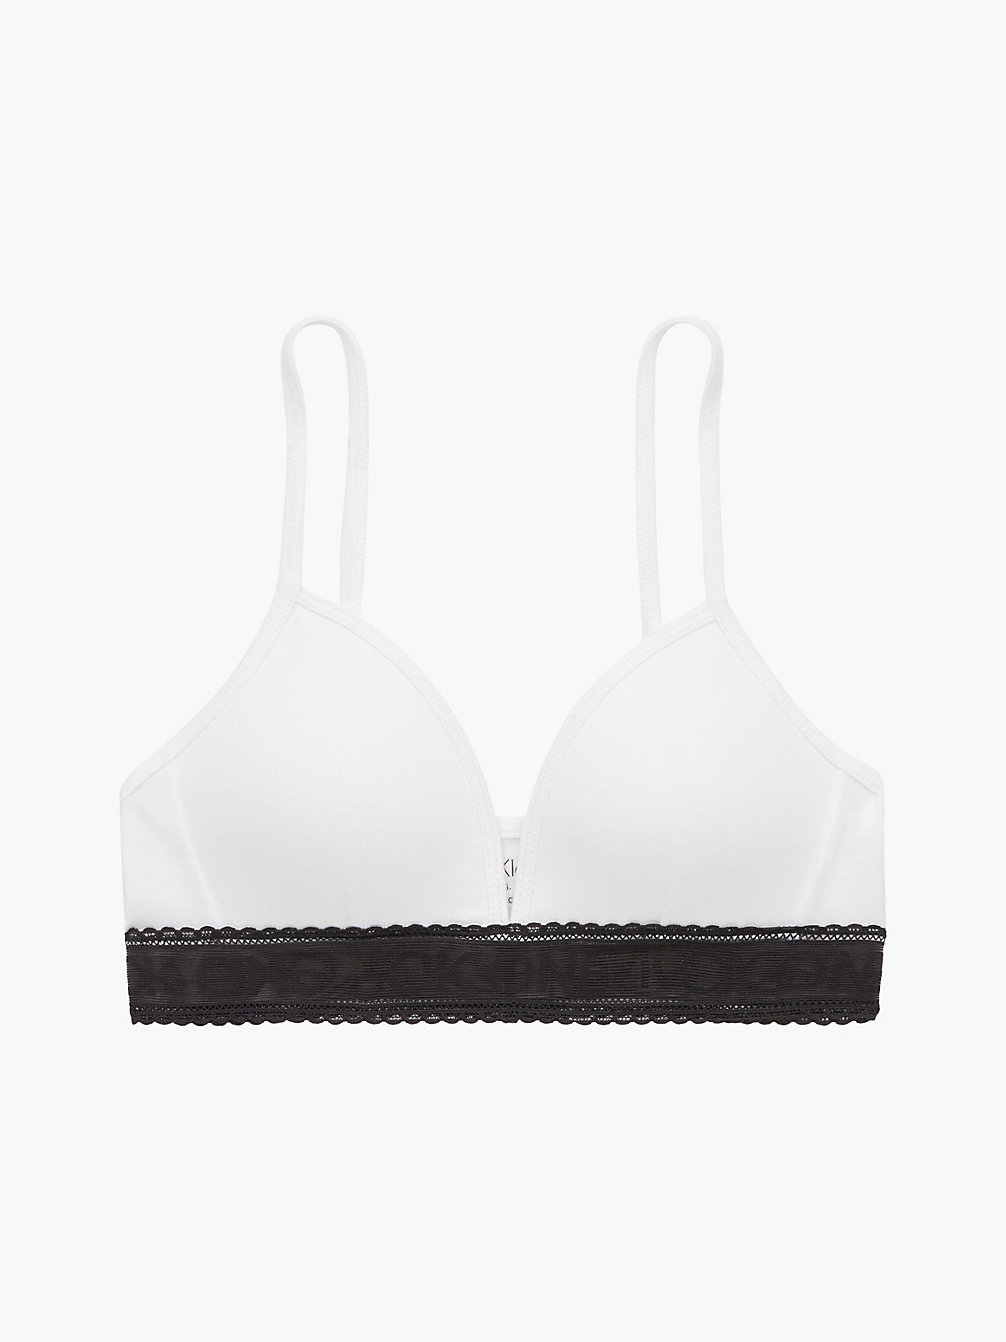 WHITE Soutien-Gorge Triangle Pour Fille - CK One undefined girls Calvin Klein